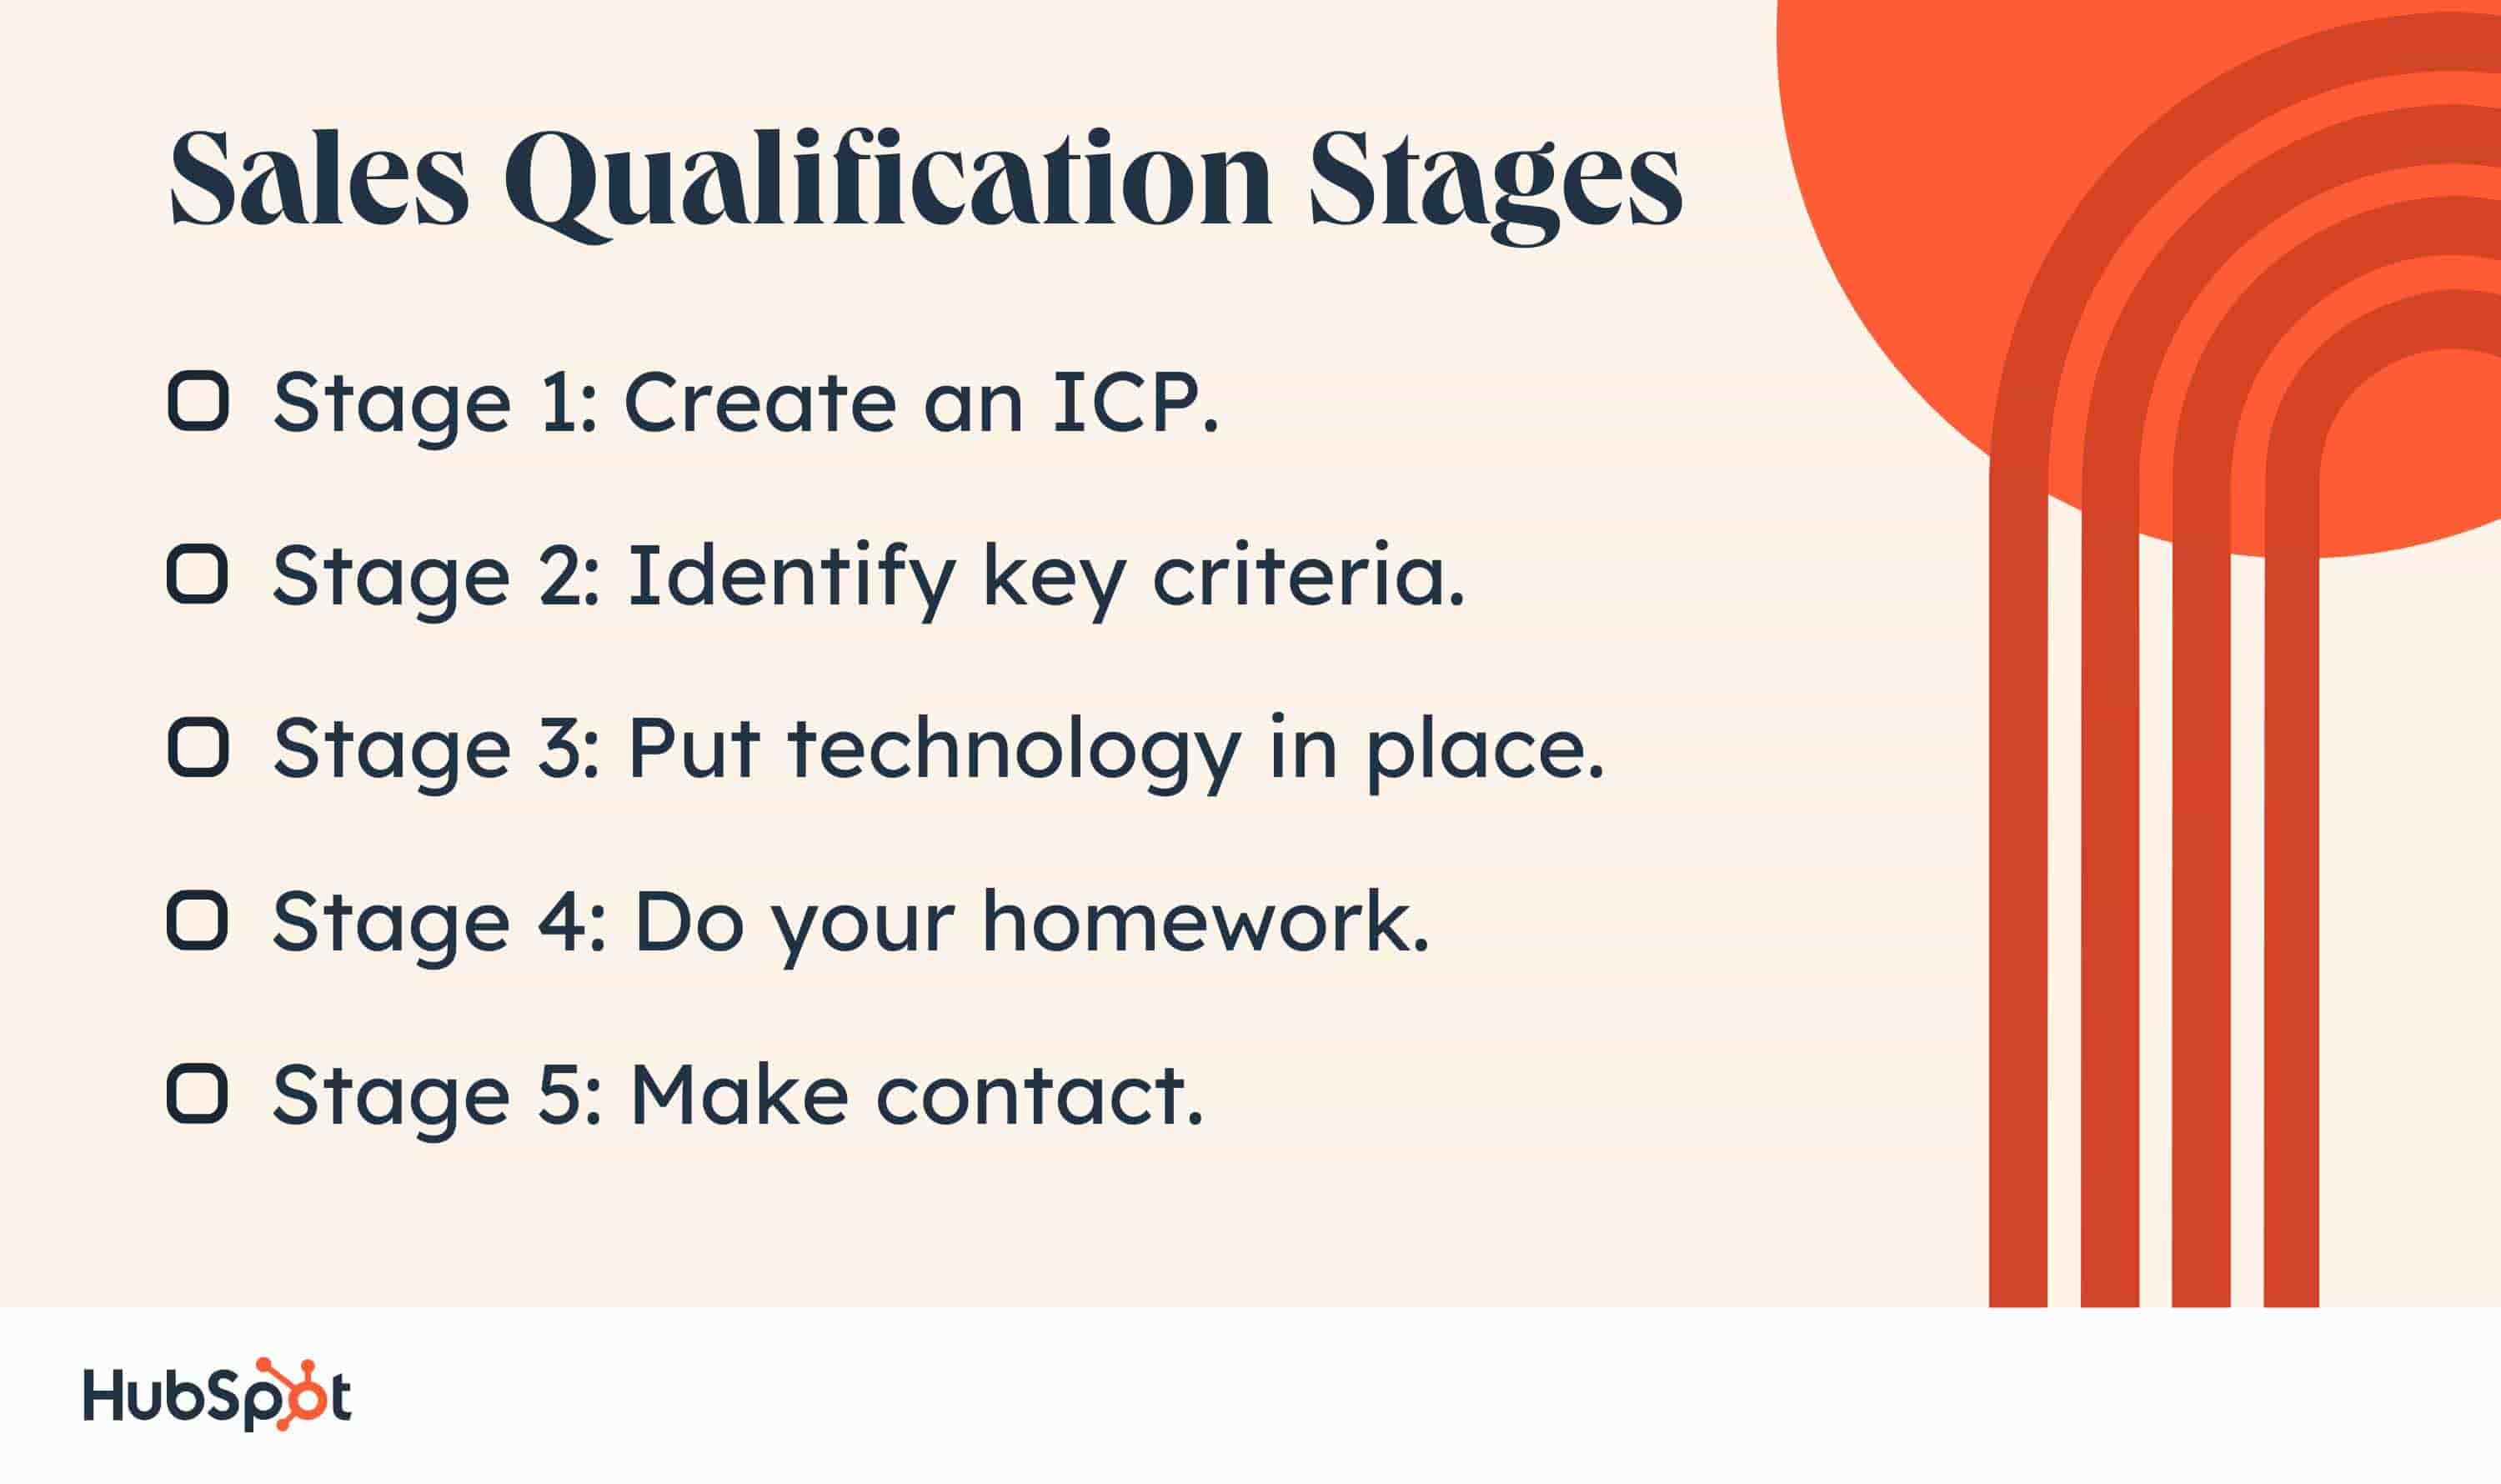 Sales Qualification Stages. Stage 1: Create an ICP. Stage 2: Identify key criteria. Stage 3: Put technology in place. Stage 4: Do your homework. Stage 5: Make contact.